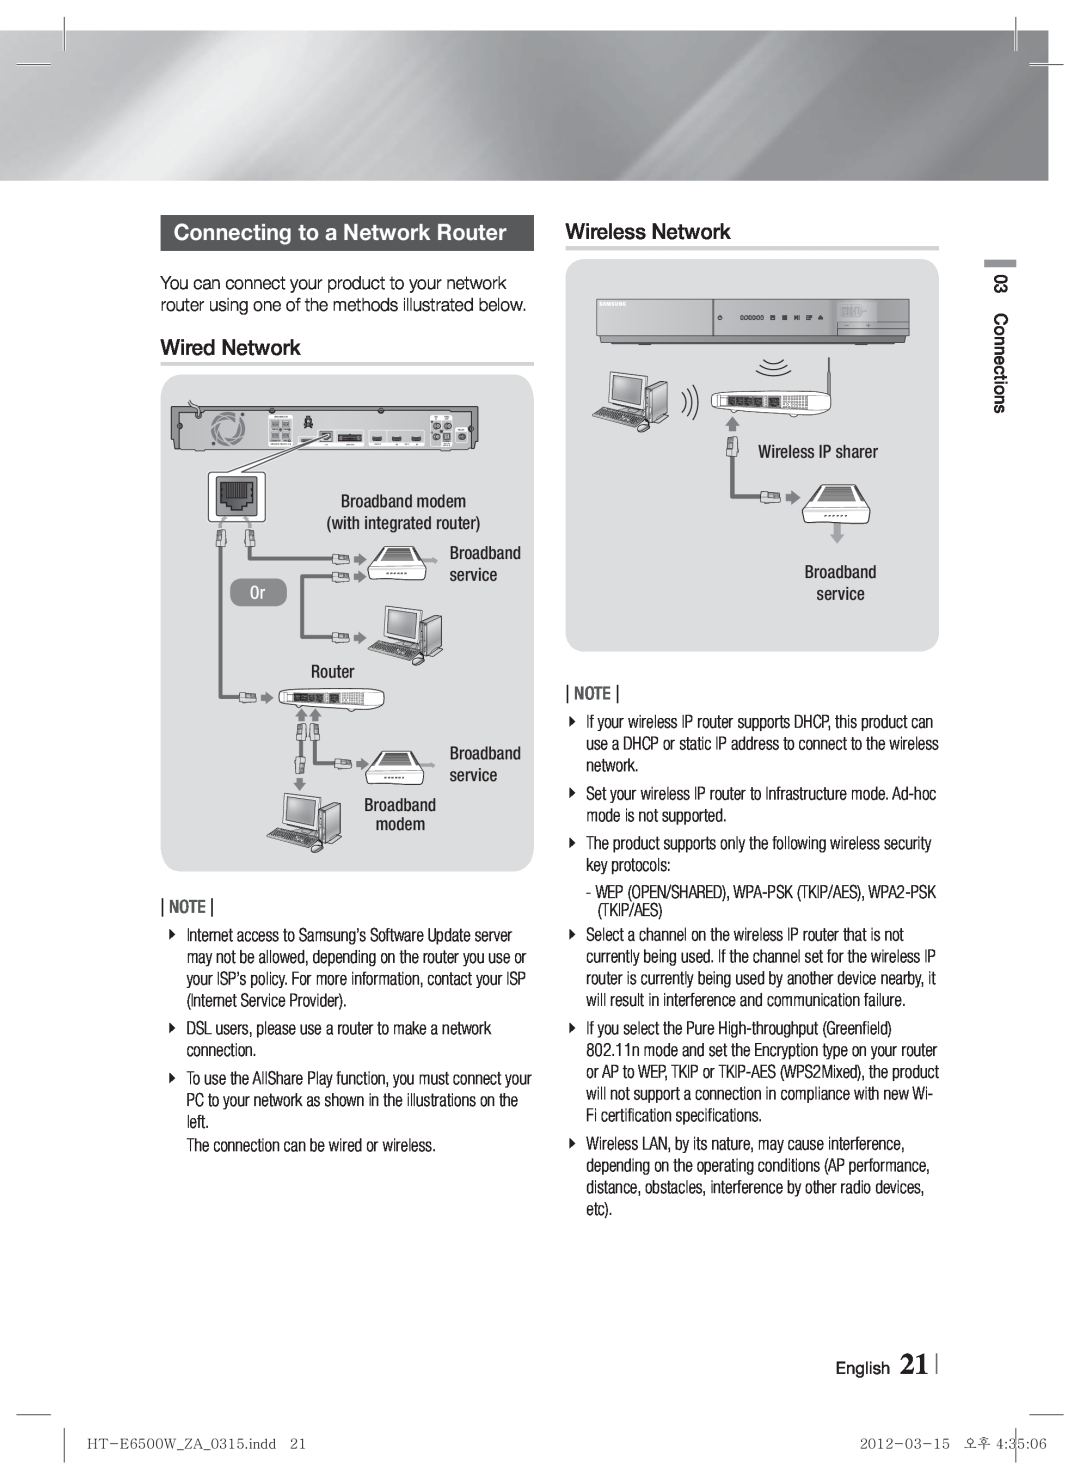 Samsung HTE6500WZA, HT-E6500W user manual Connecting to a Network Router, Wireless Network, Note 